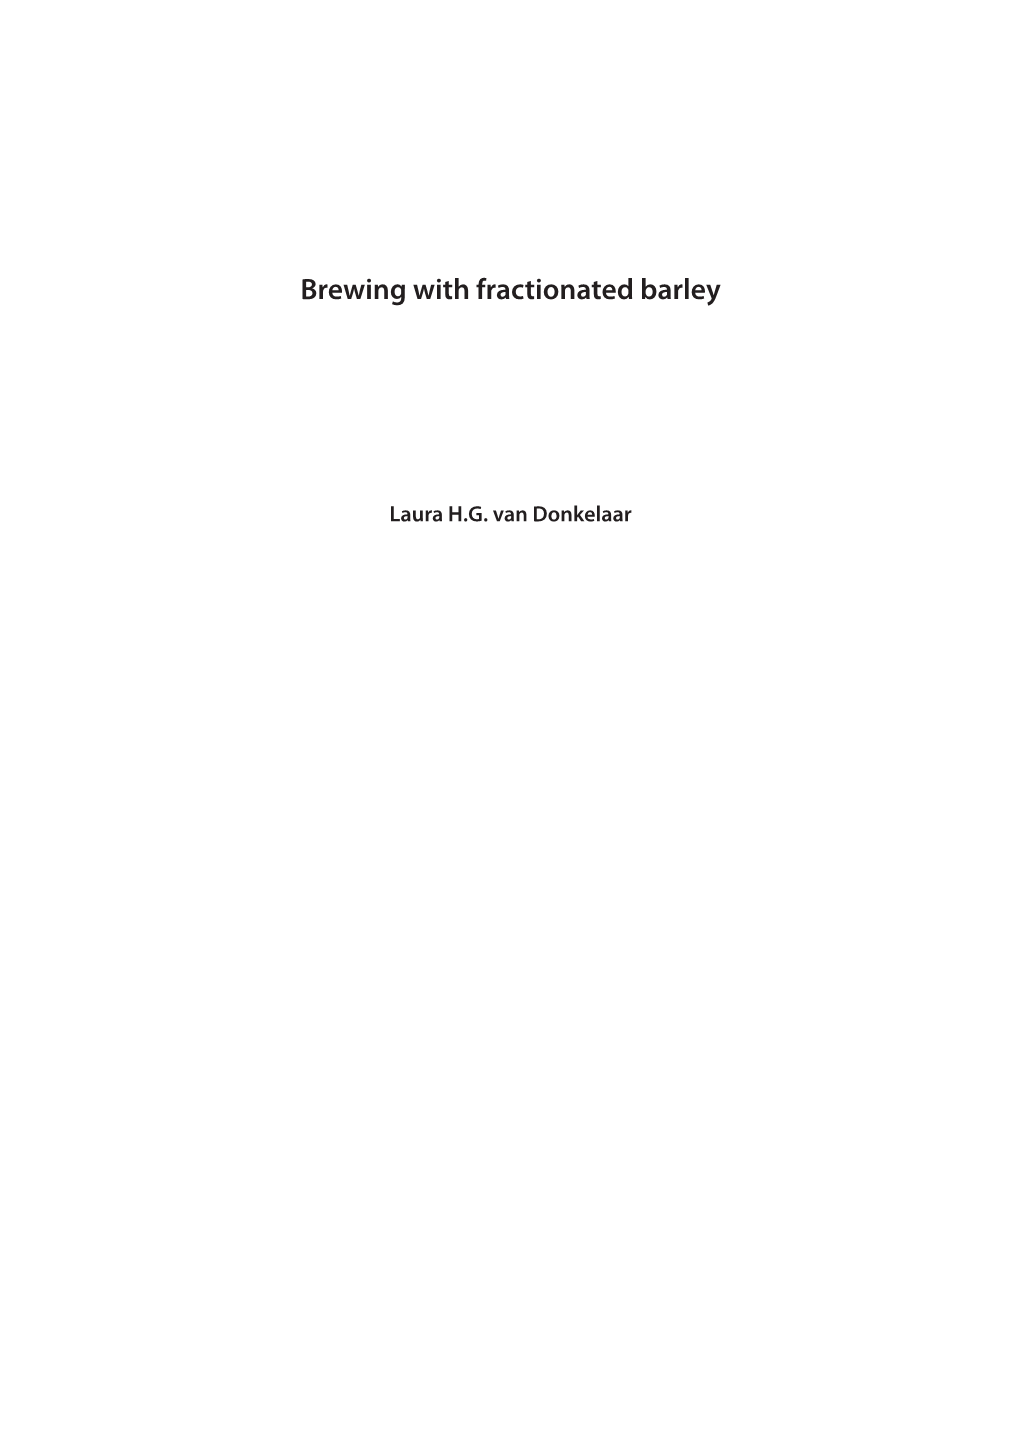 Brewing with Fractionated Barley